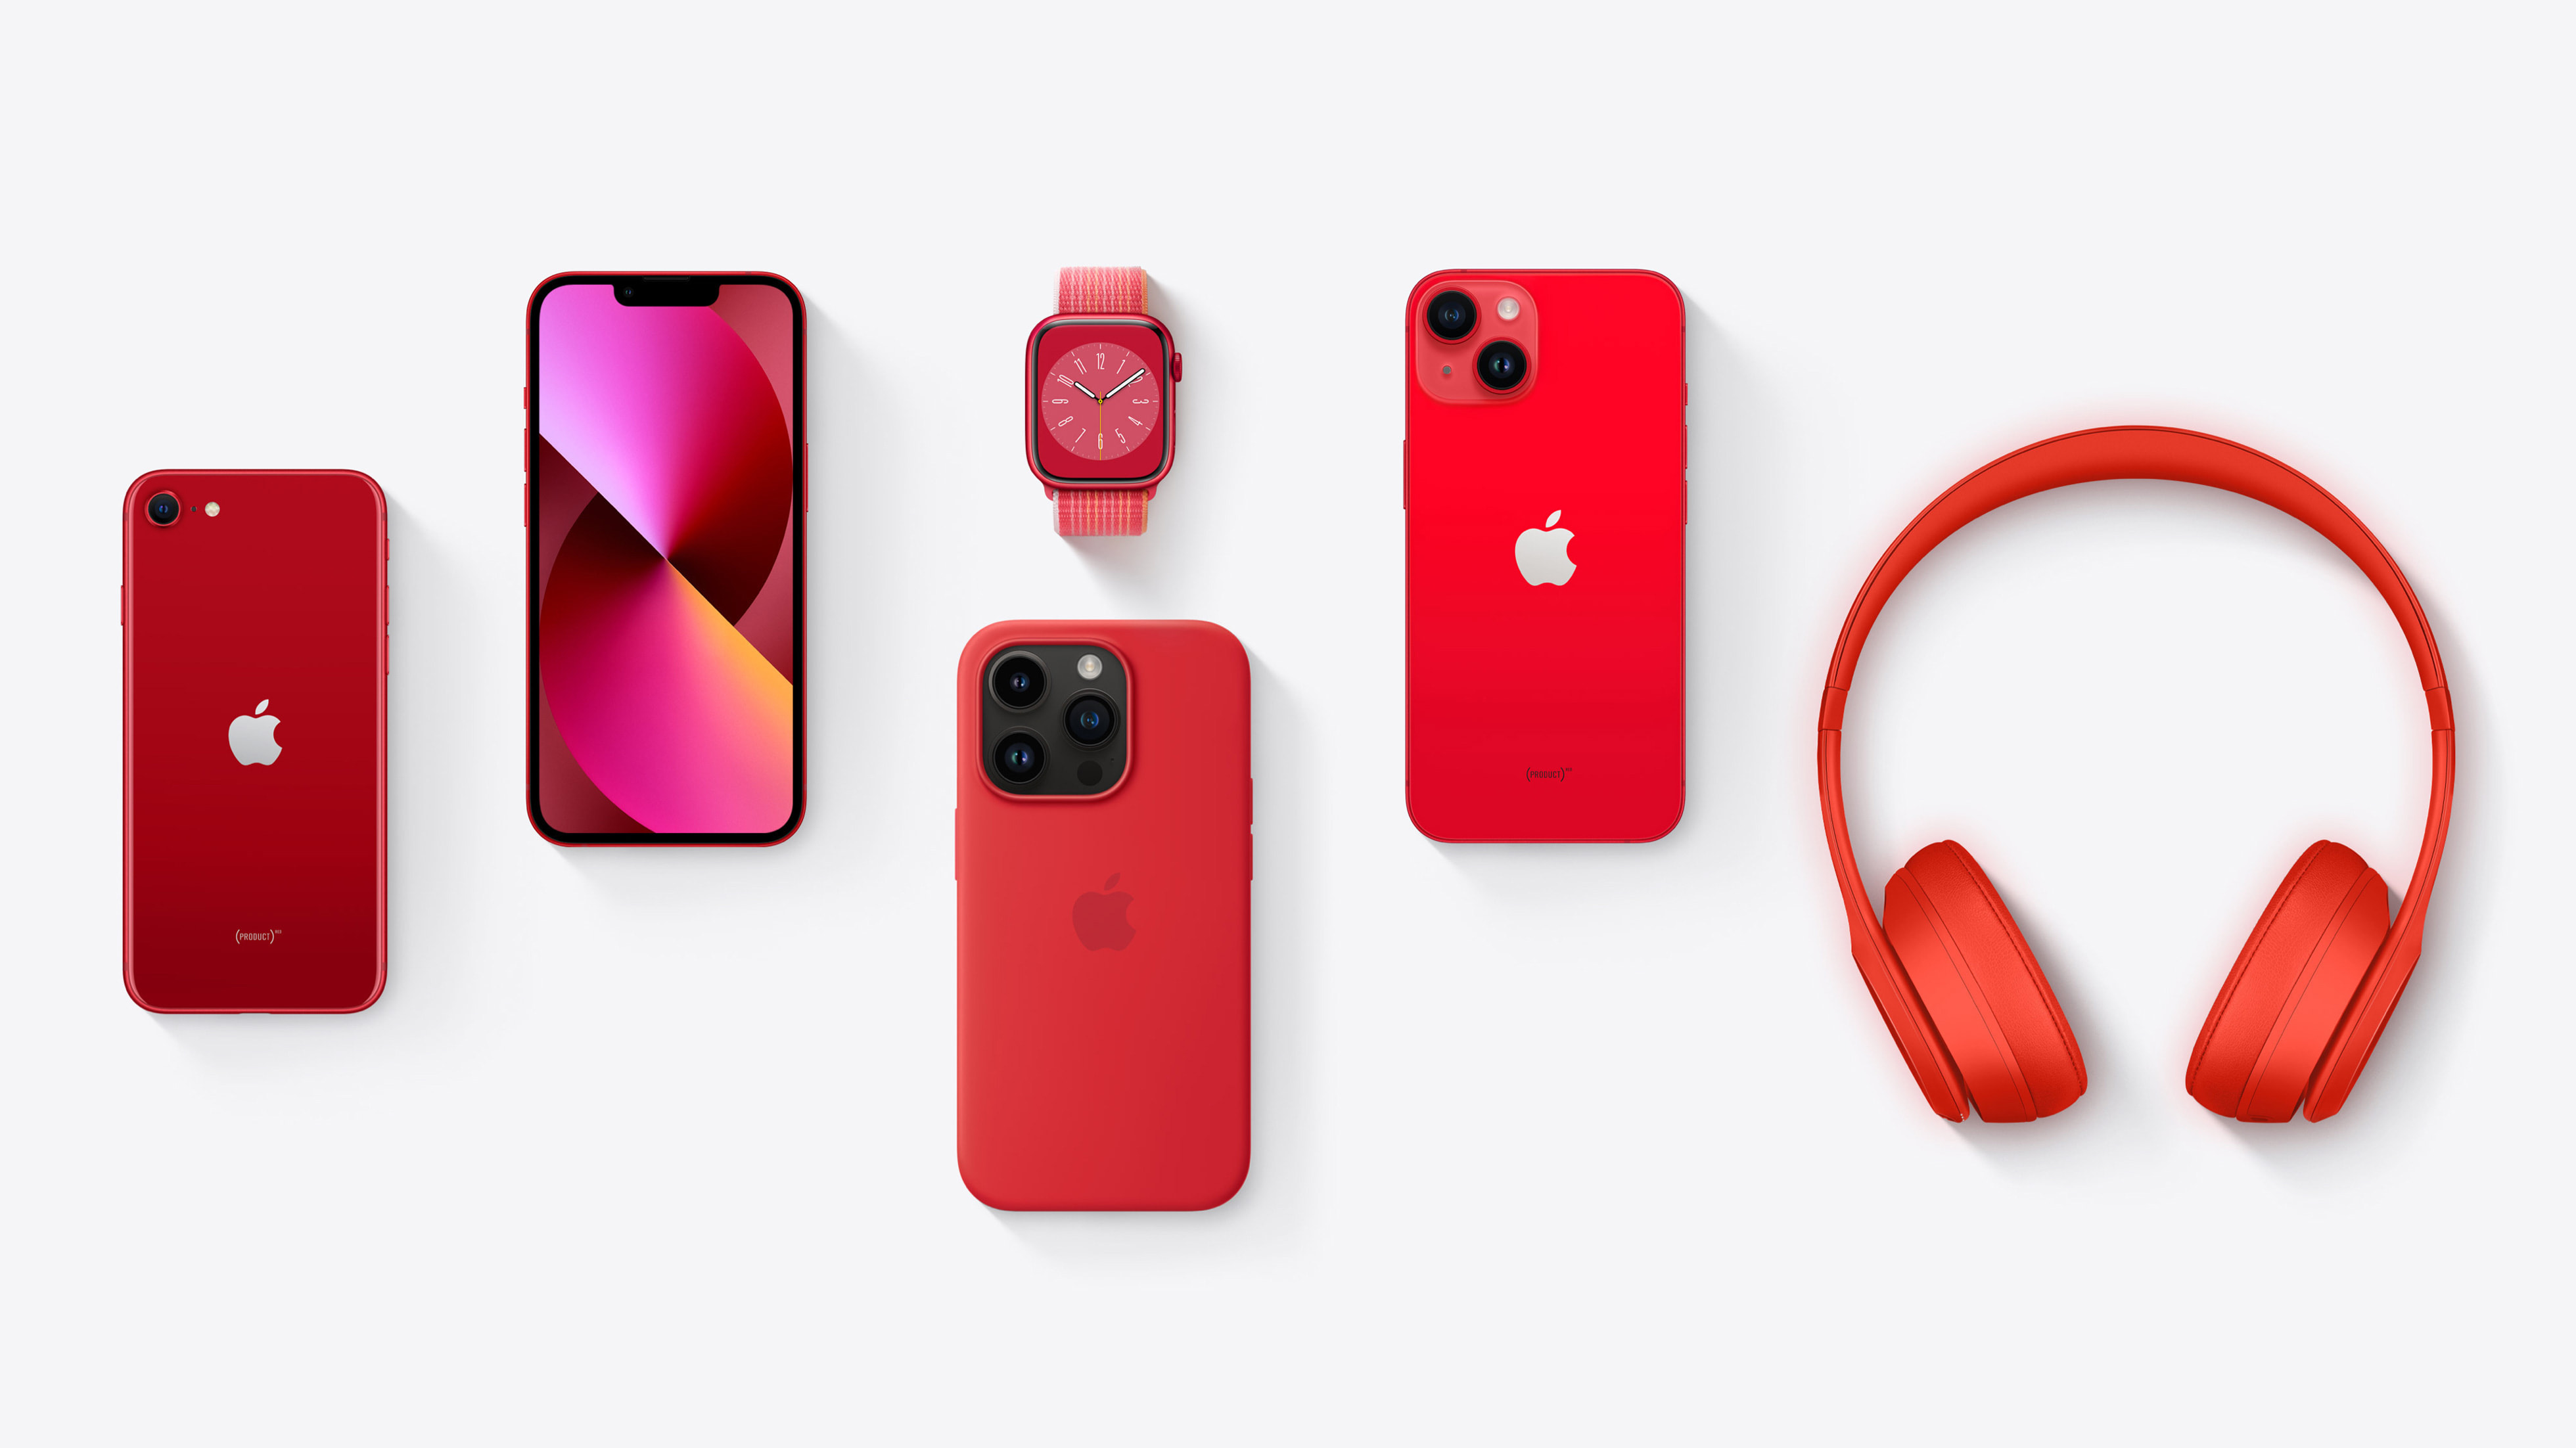 Apple turns (RED) to raise visibility for World AIDS Day - Apple